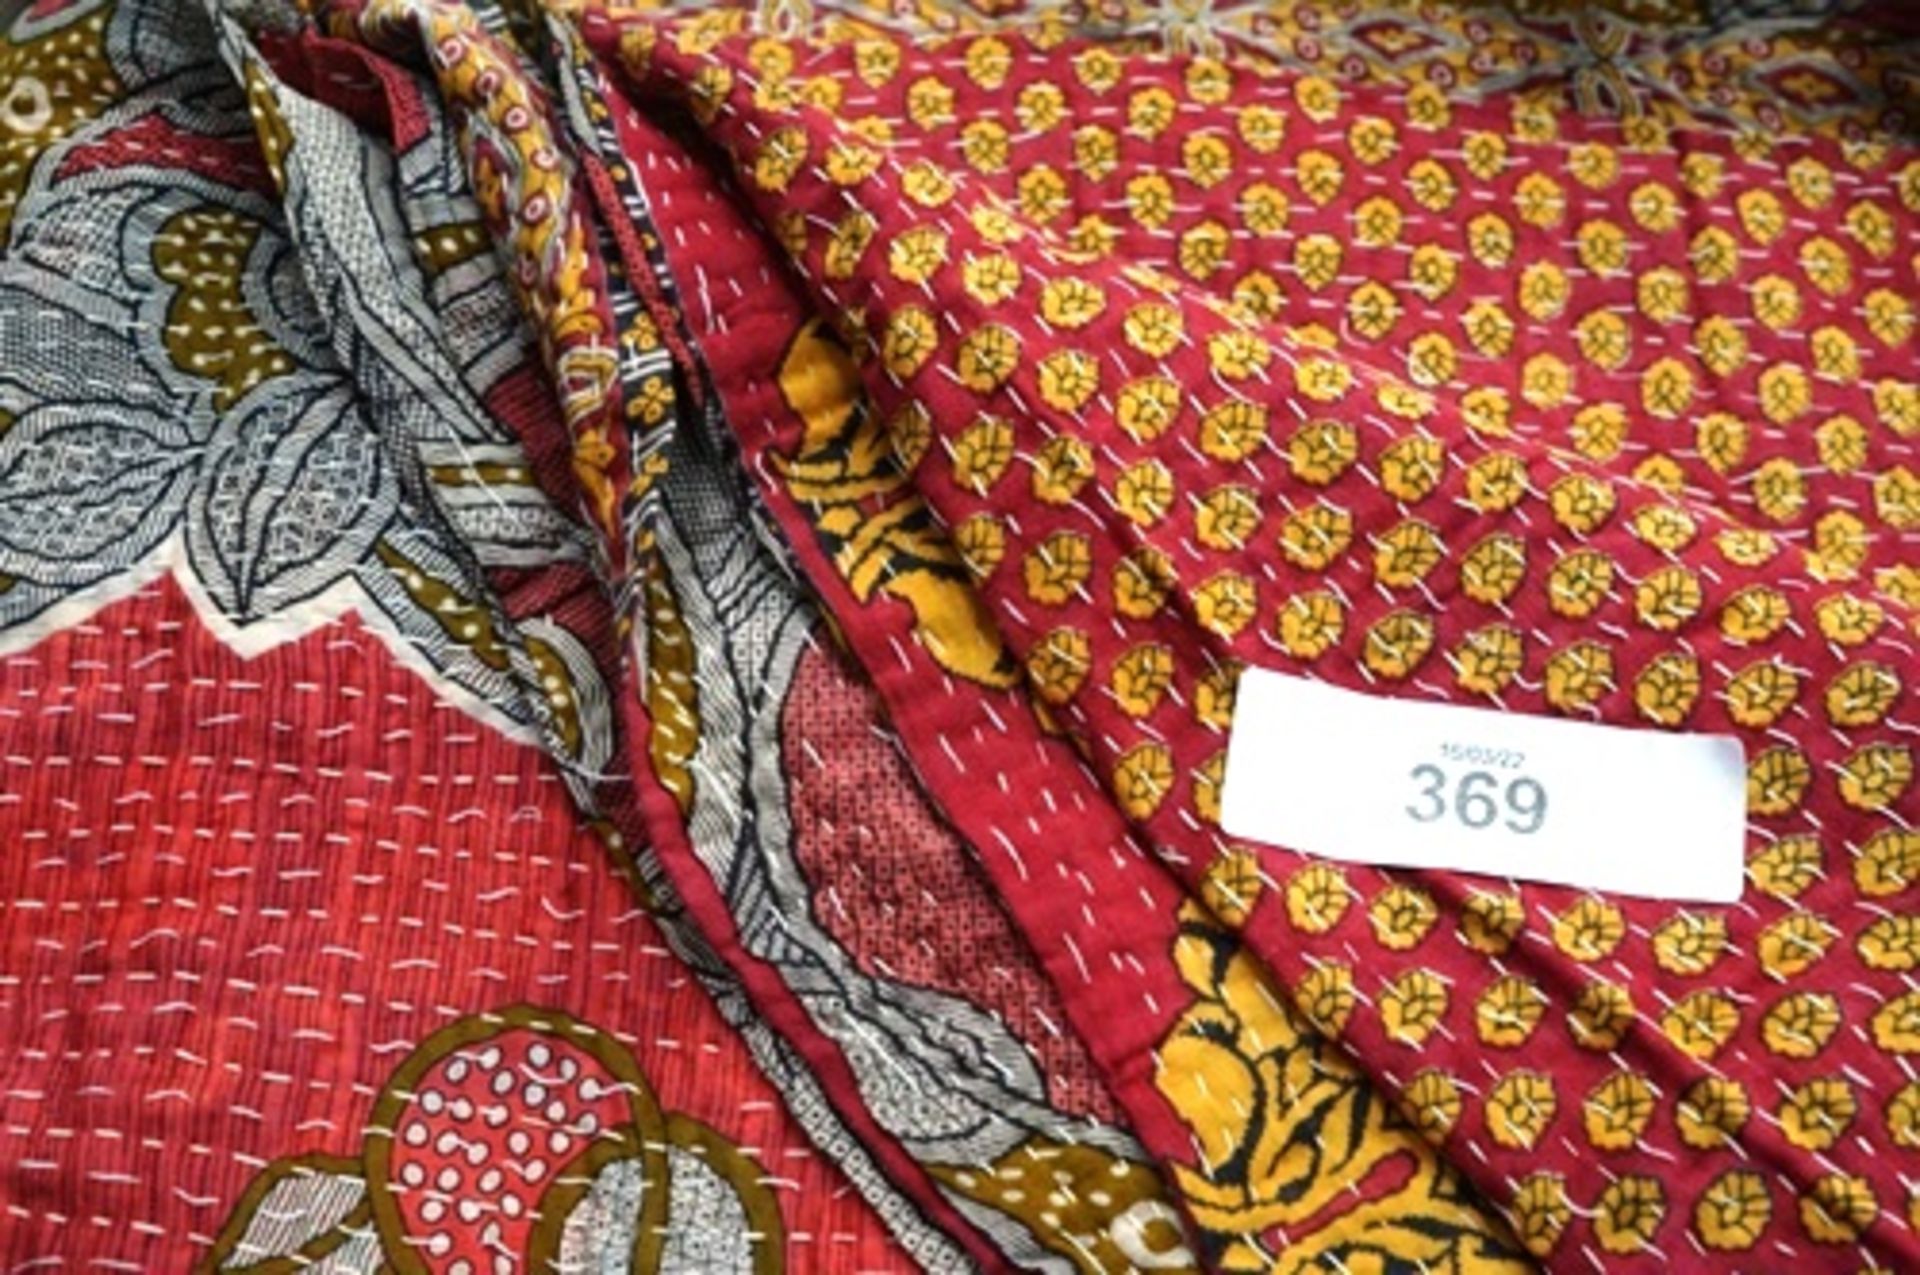 1 x Urban Outfitters reversible Vintage Kantha Throw, one size. -new with tags- (C8D).